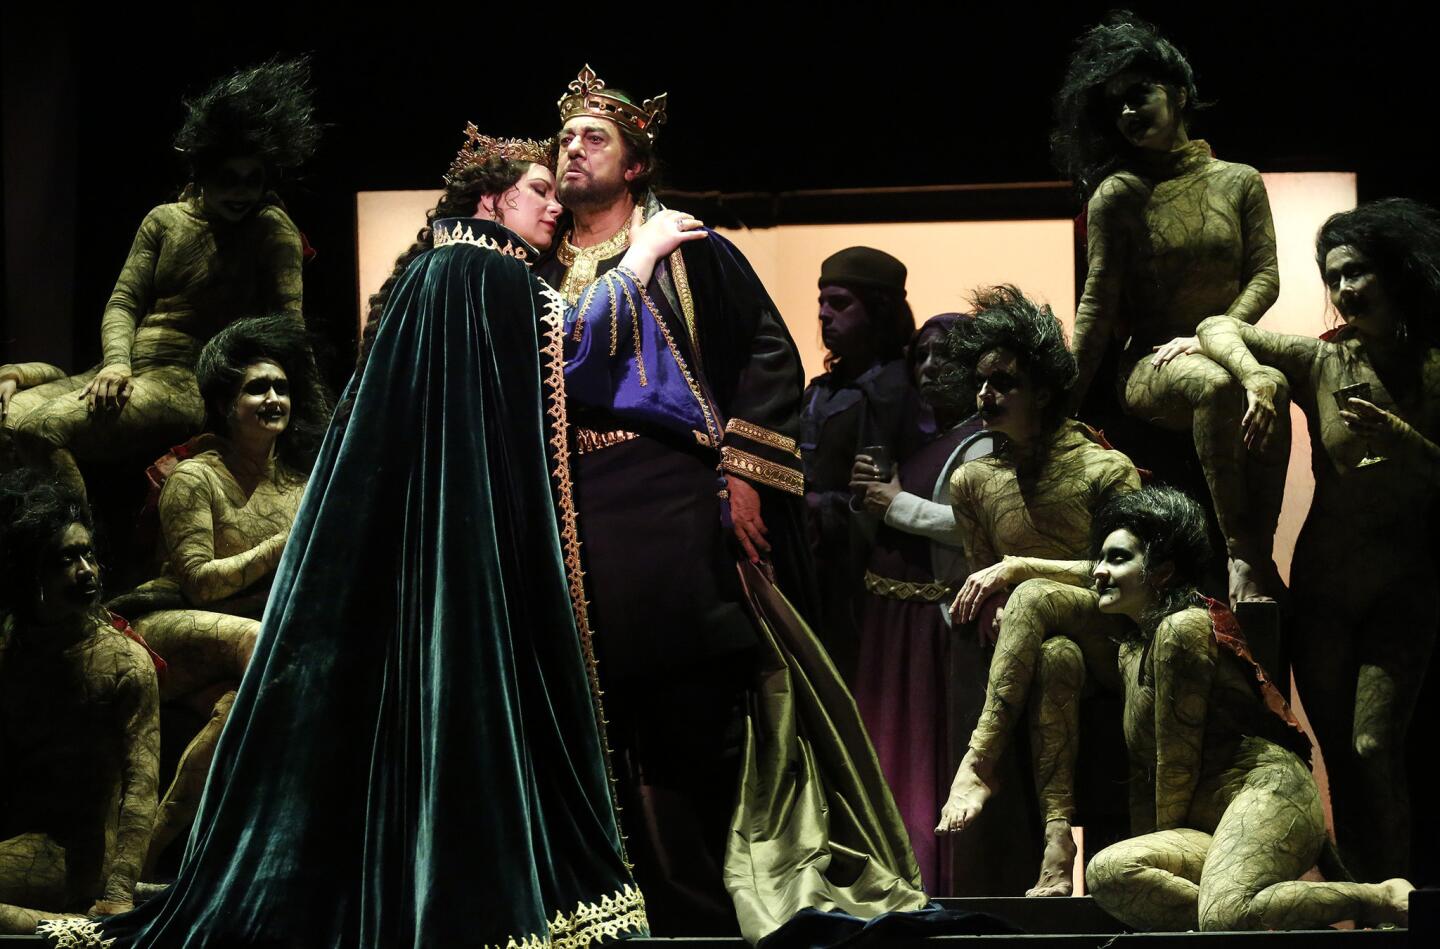 Plácido Domingo portrays Macbeth and Ekaterina Semenchuk is Lady Macbeth in Los Angeles Opera's new production of Verdi's "Macbeth." Meddlesome witches seem to direct the action in Darko Tresnjak's staging.